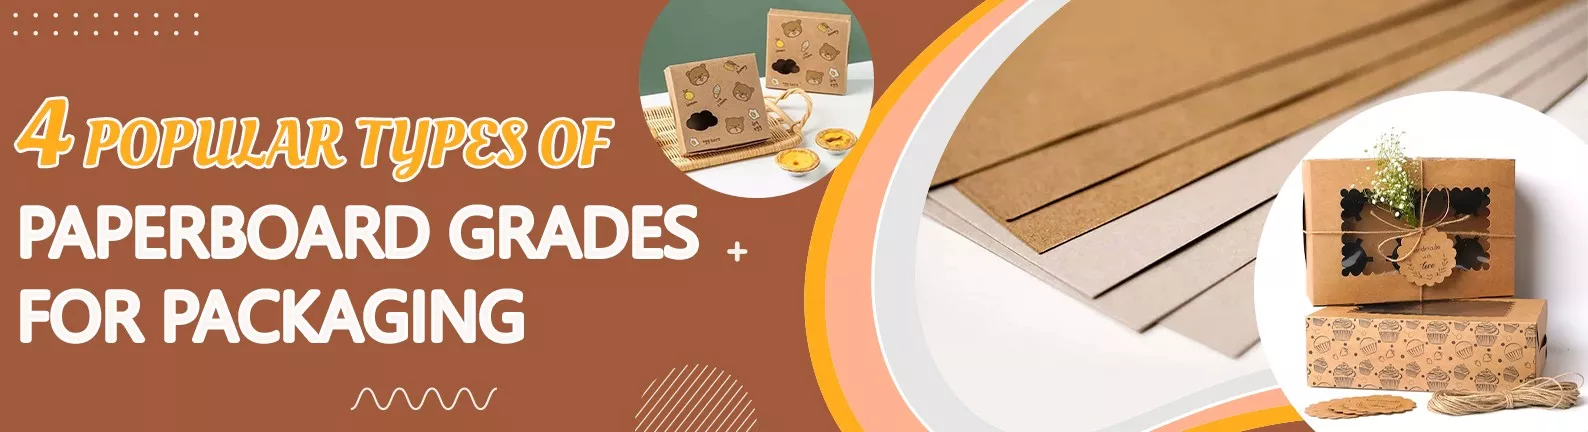 4-Popular-Types-of-Paperboard-Grades-For-Packaging